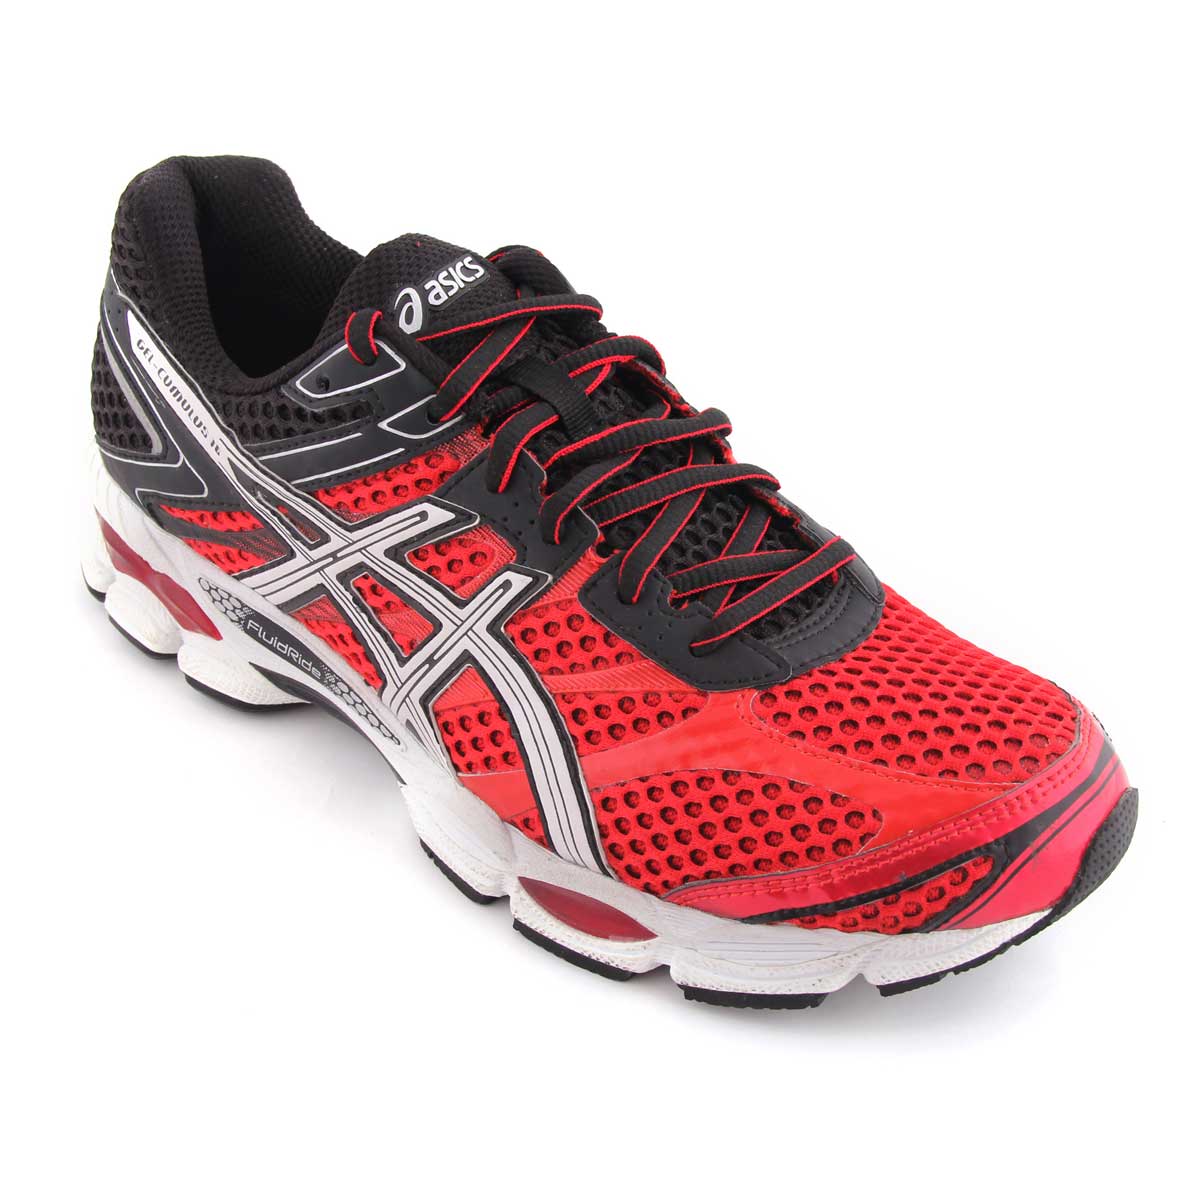 asics shoes discount online india